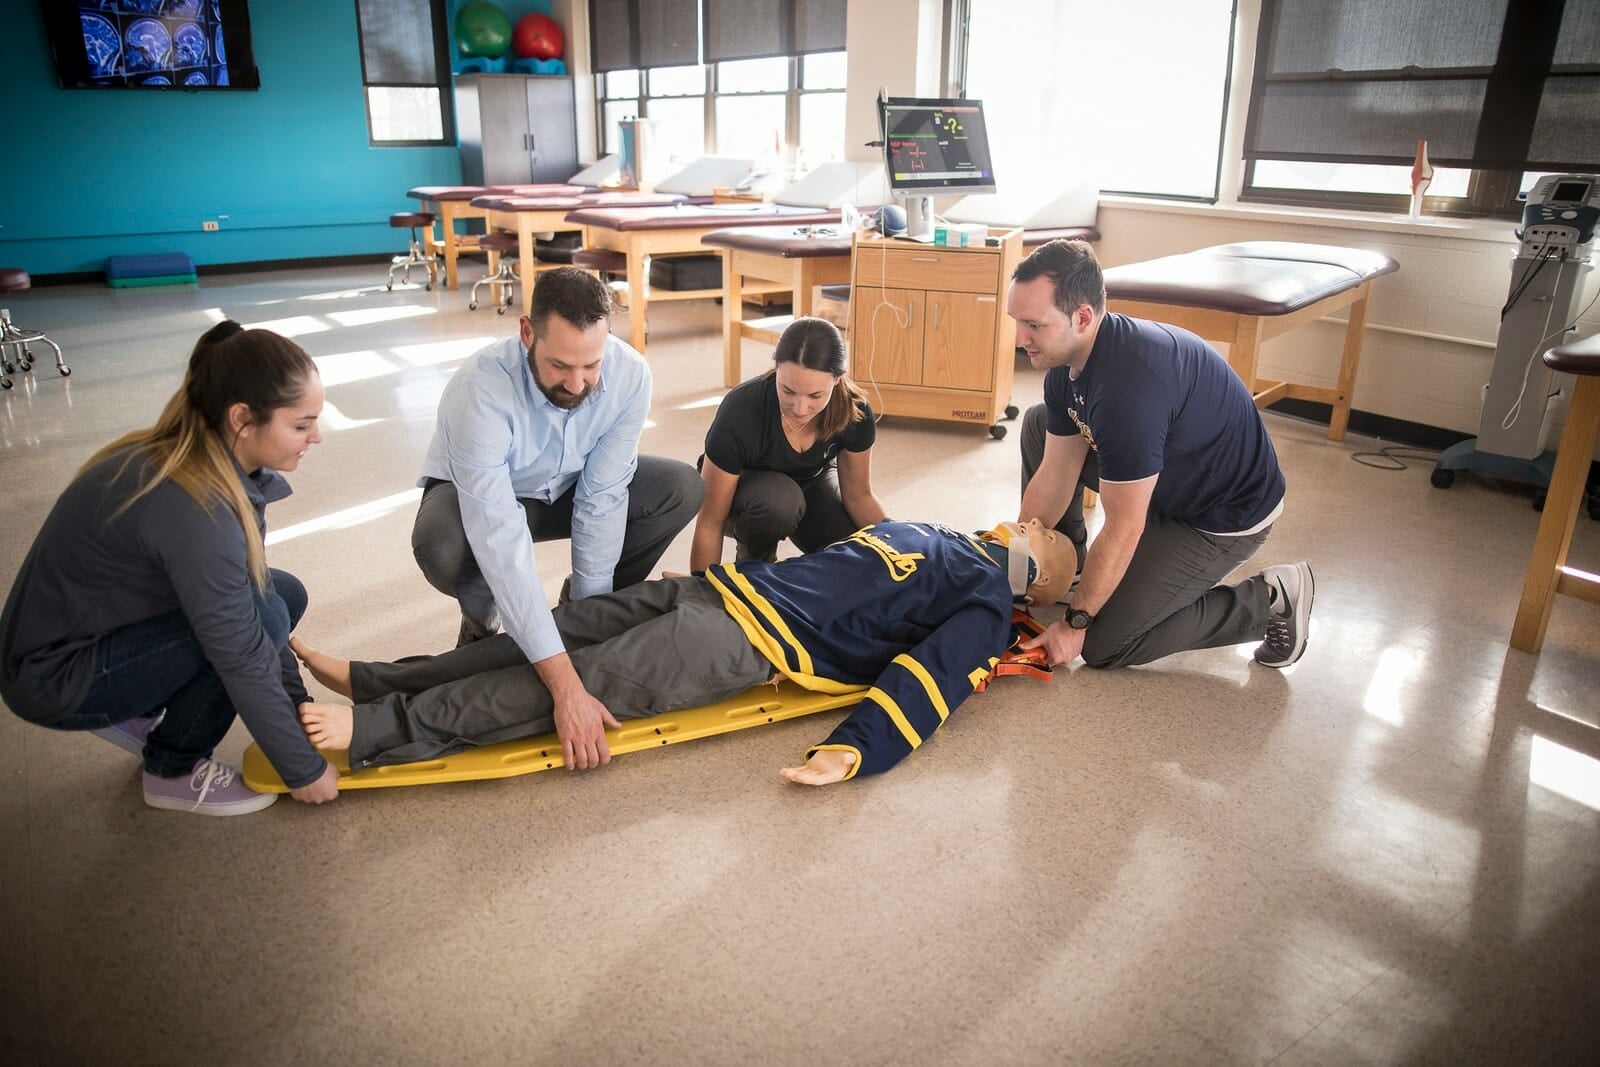 Faculty and students putting Manikin on stretcher